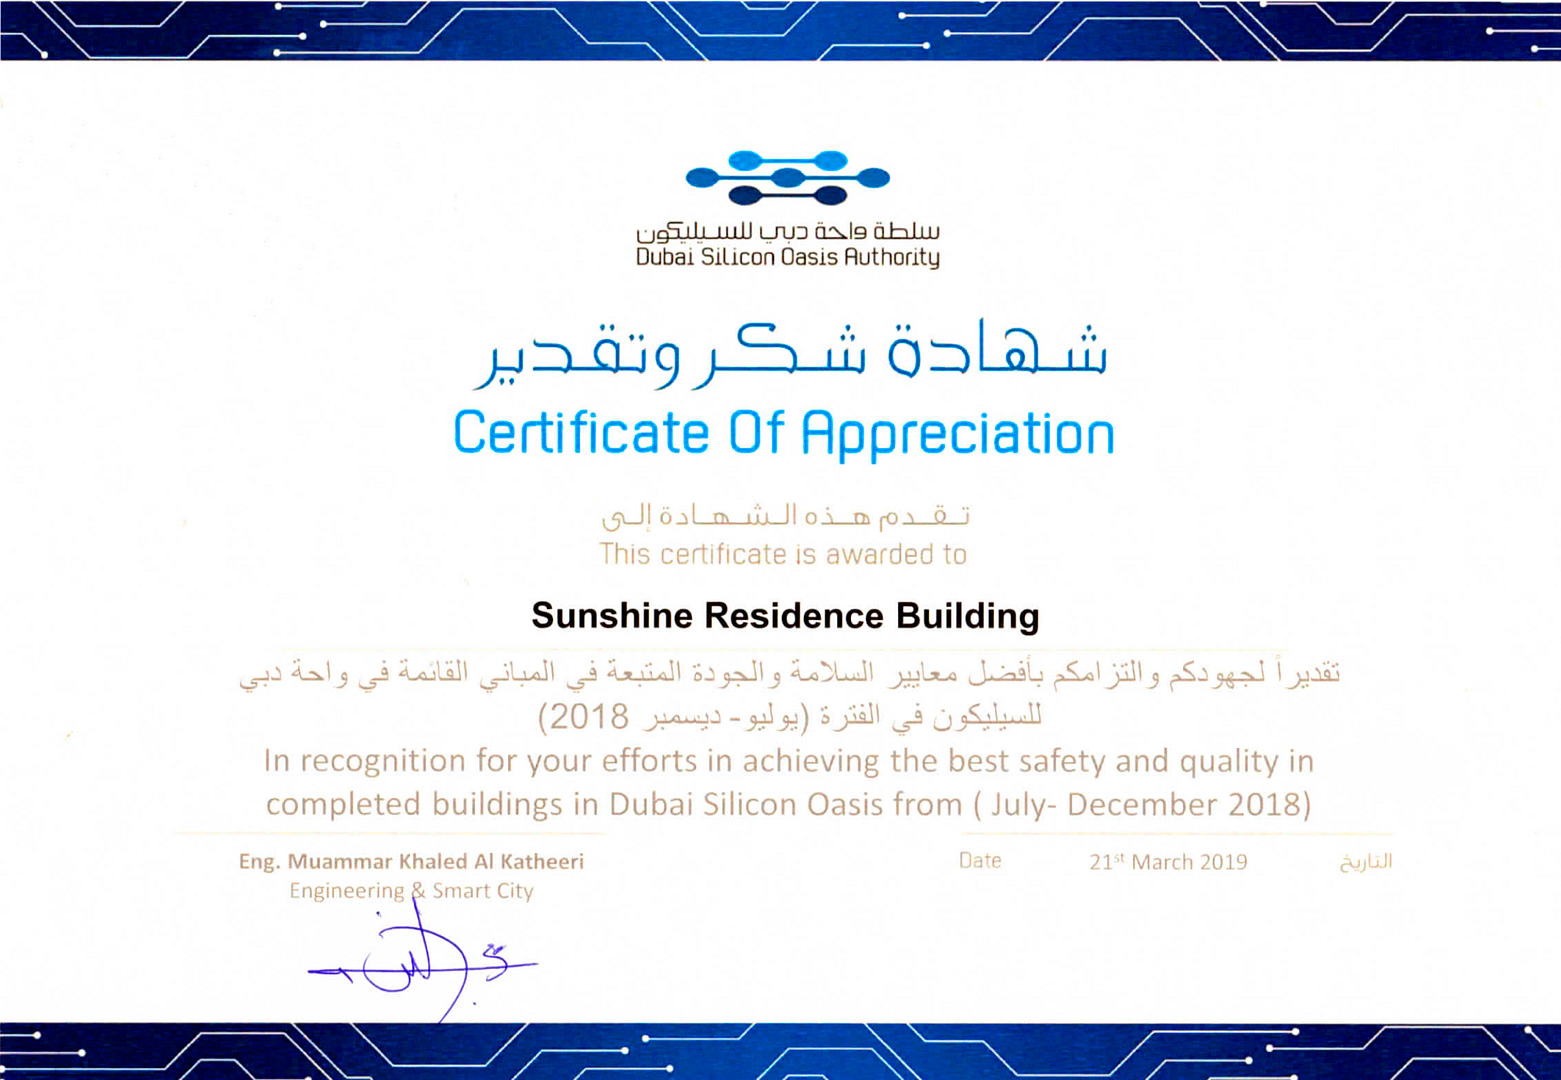 Awarded Best Maintained Building from DSOA - 2018